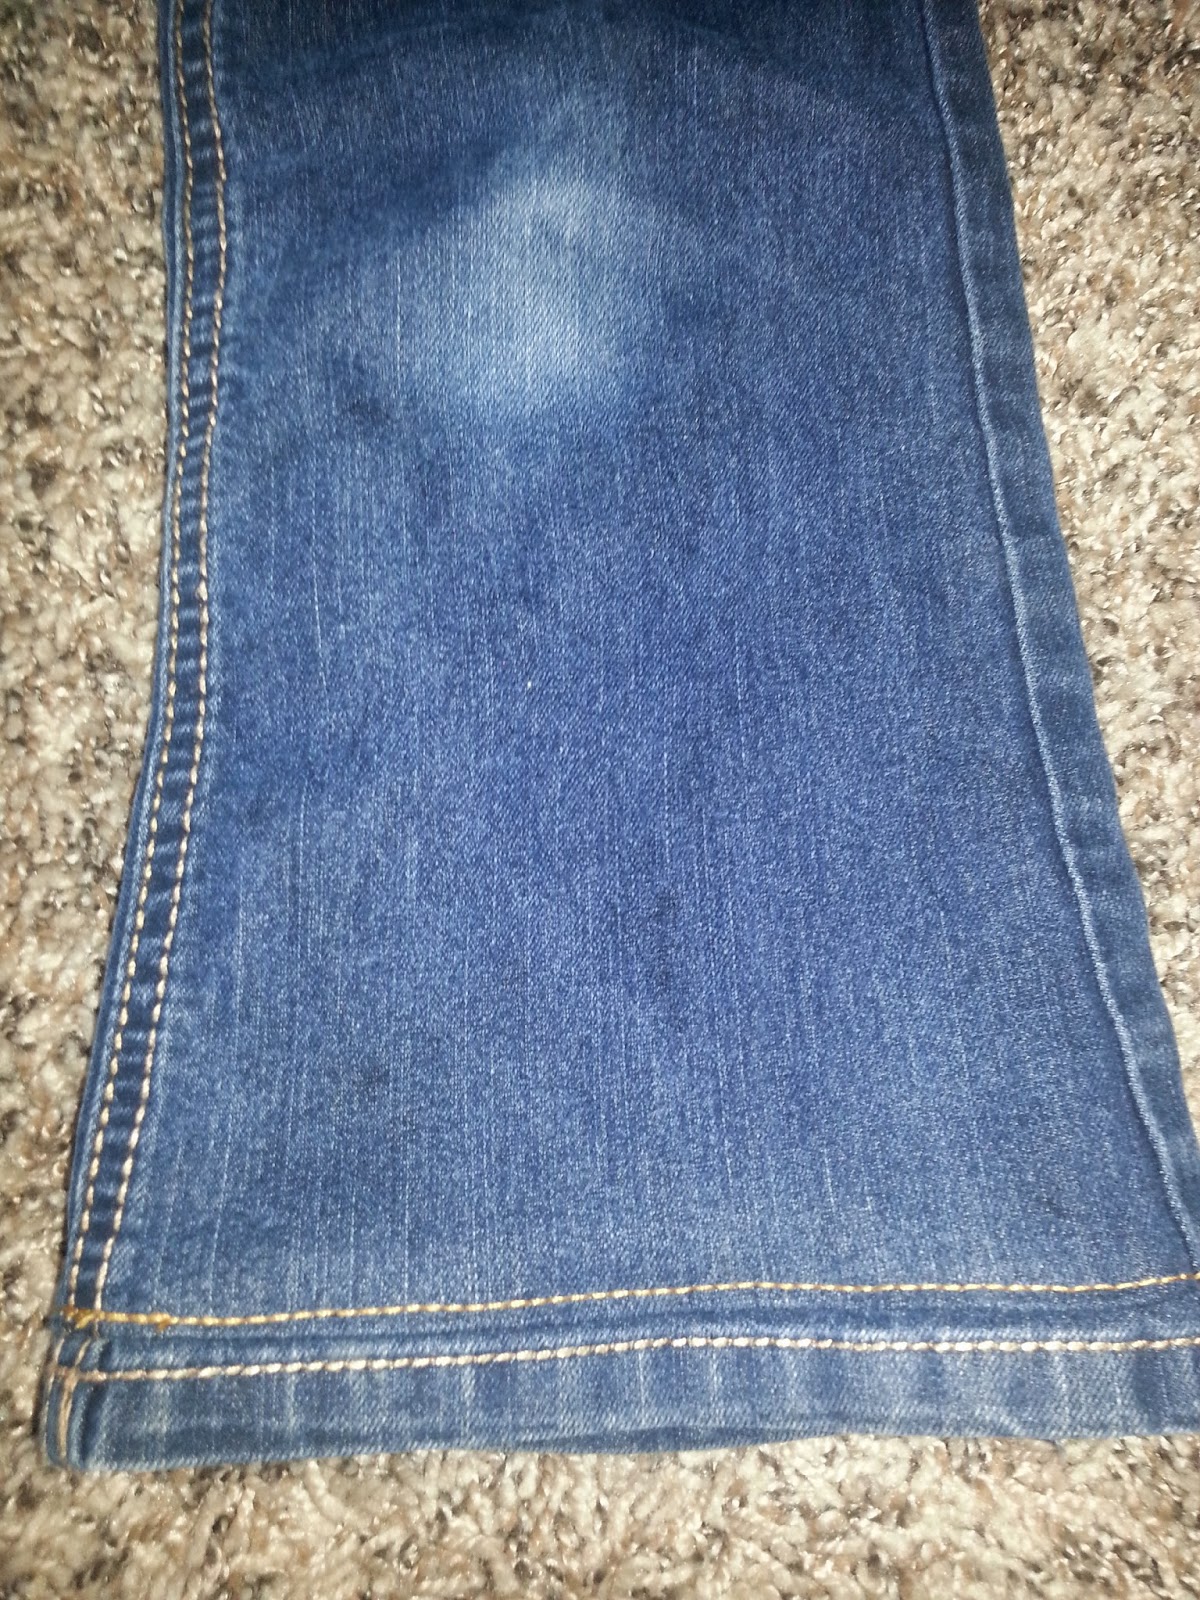 wholesome and homemade : Jeans up cycle